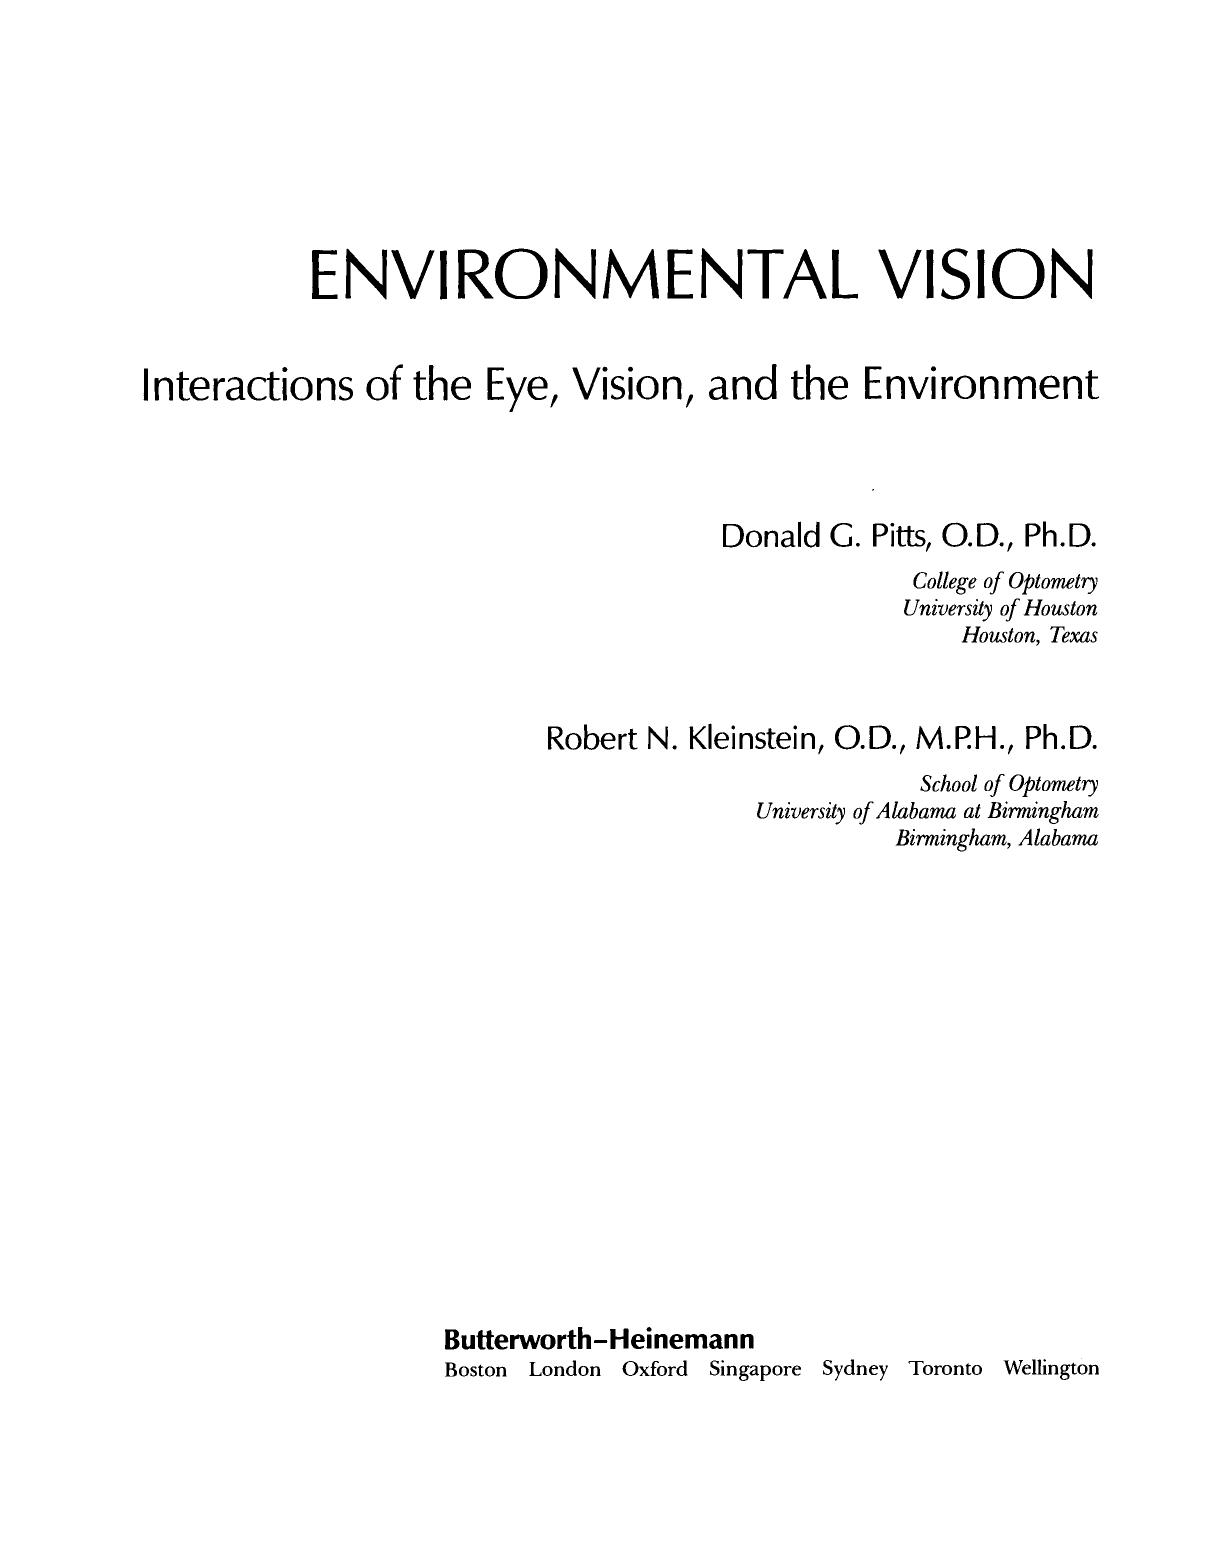 Environmental Vision. Interactions of the Eye, Vision, and the Environment 1993